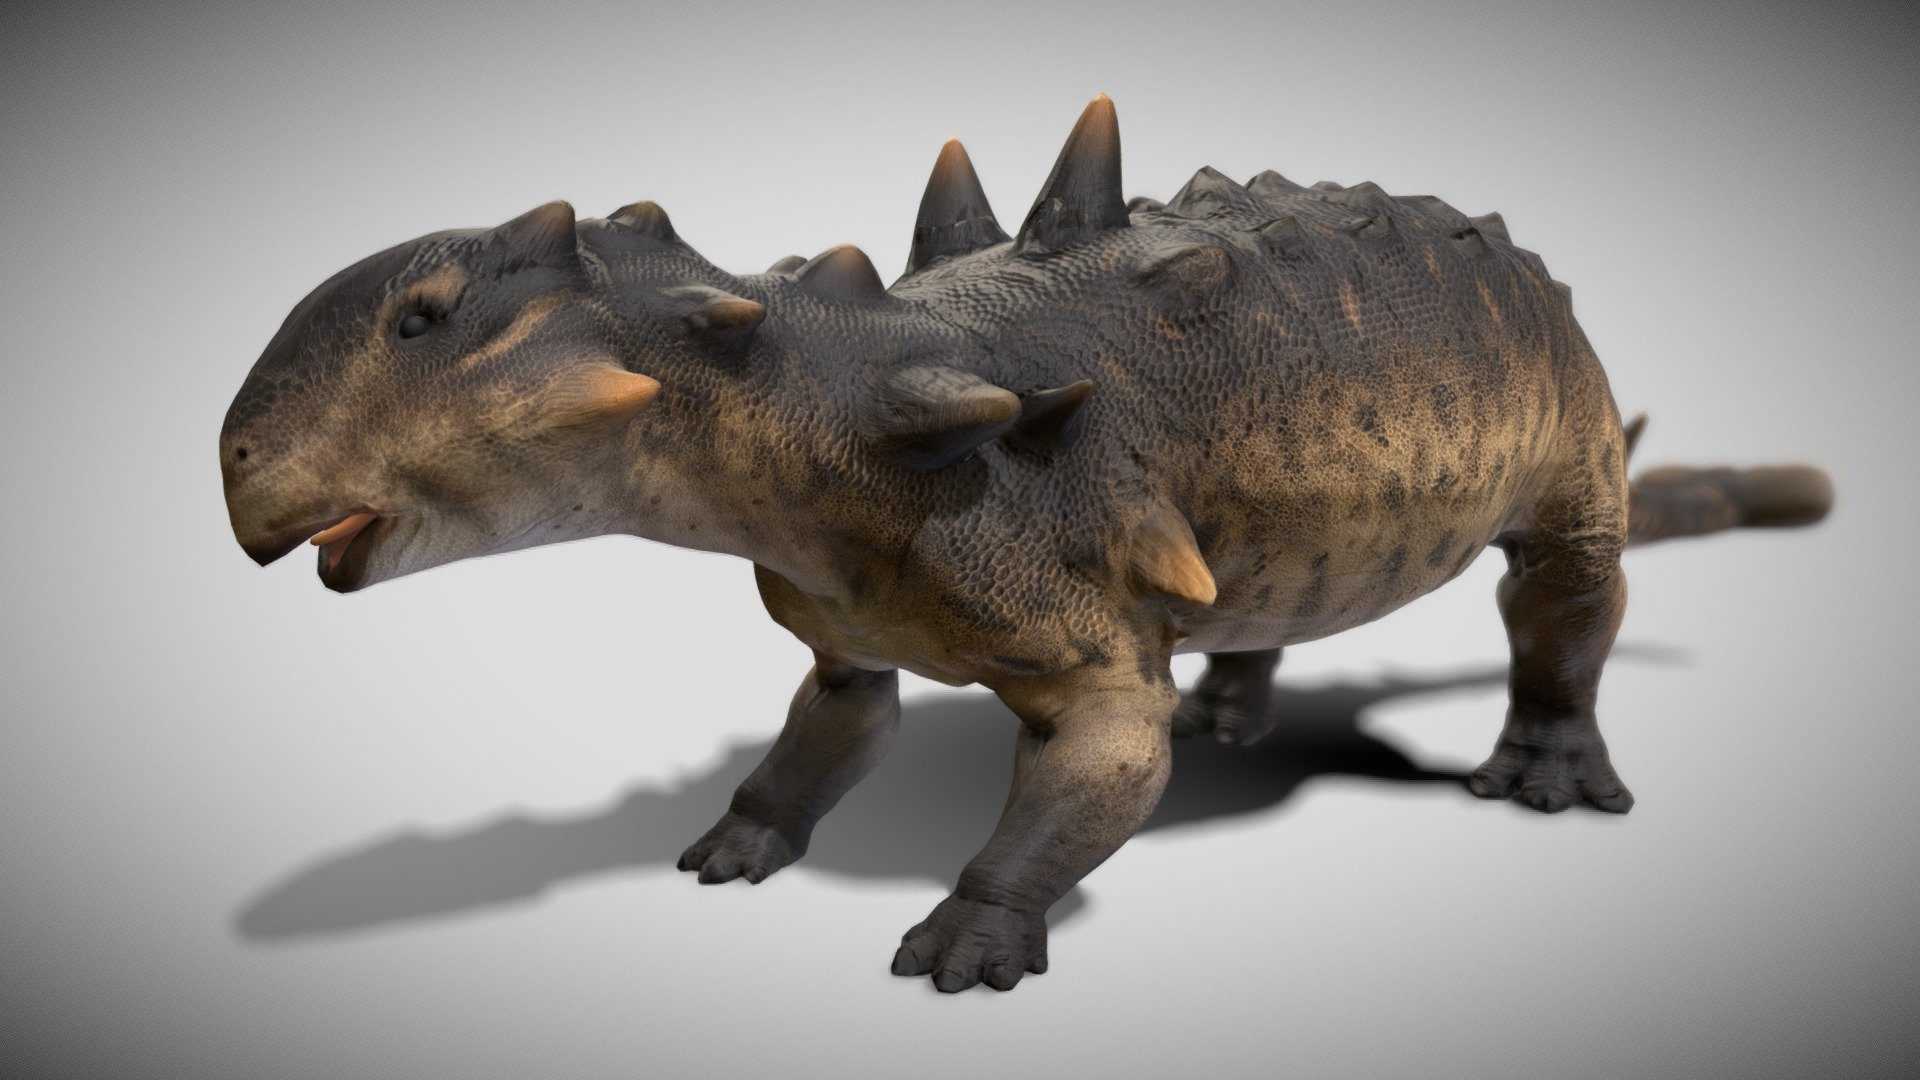 Euoplocephalus, a herbivorous dinosaur from the Late Cretaceous period, marches into the prehistoric scene as a heavily armored ankylosaurid. This dinosaur, known for its tank-like appearance, was equipped with an impressive array of bony plates and spikes, providing it with formidable protection against predators.

Characterized by a low-slung body, a broad tail club, and a covering of bony armor called osteoderms, Euoplocephalus was a quadrupedal herbivore. Its tail club, in particular, was a defensive weapon, possibly used to fend off predators or intruders.

Step into the Late Cretaceous world with Euoplocephalus, a living fortress that roamed the ancient landscapes. Explore the mysteries of this ankylosaurid dinosaur with - Euoplocephalus - Buy Royalty Free 3D model by robertfabiani 3d model